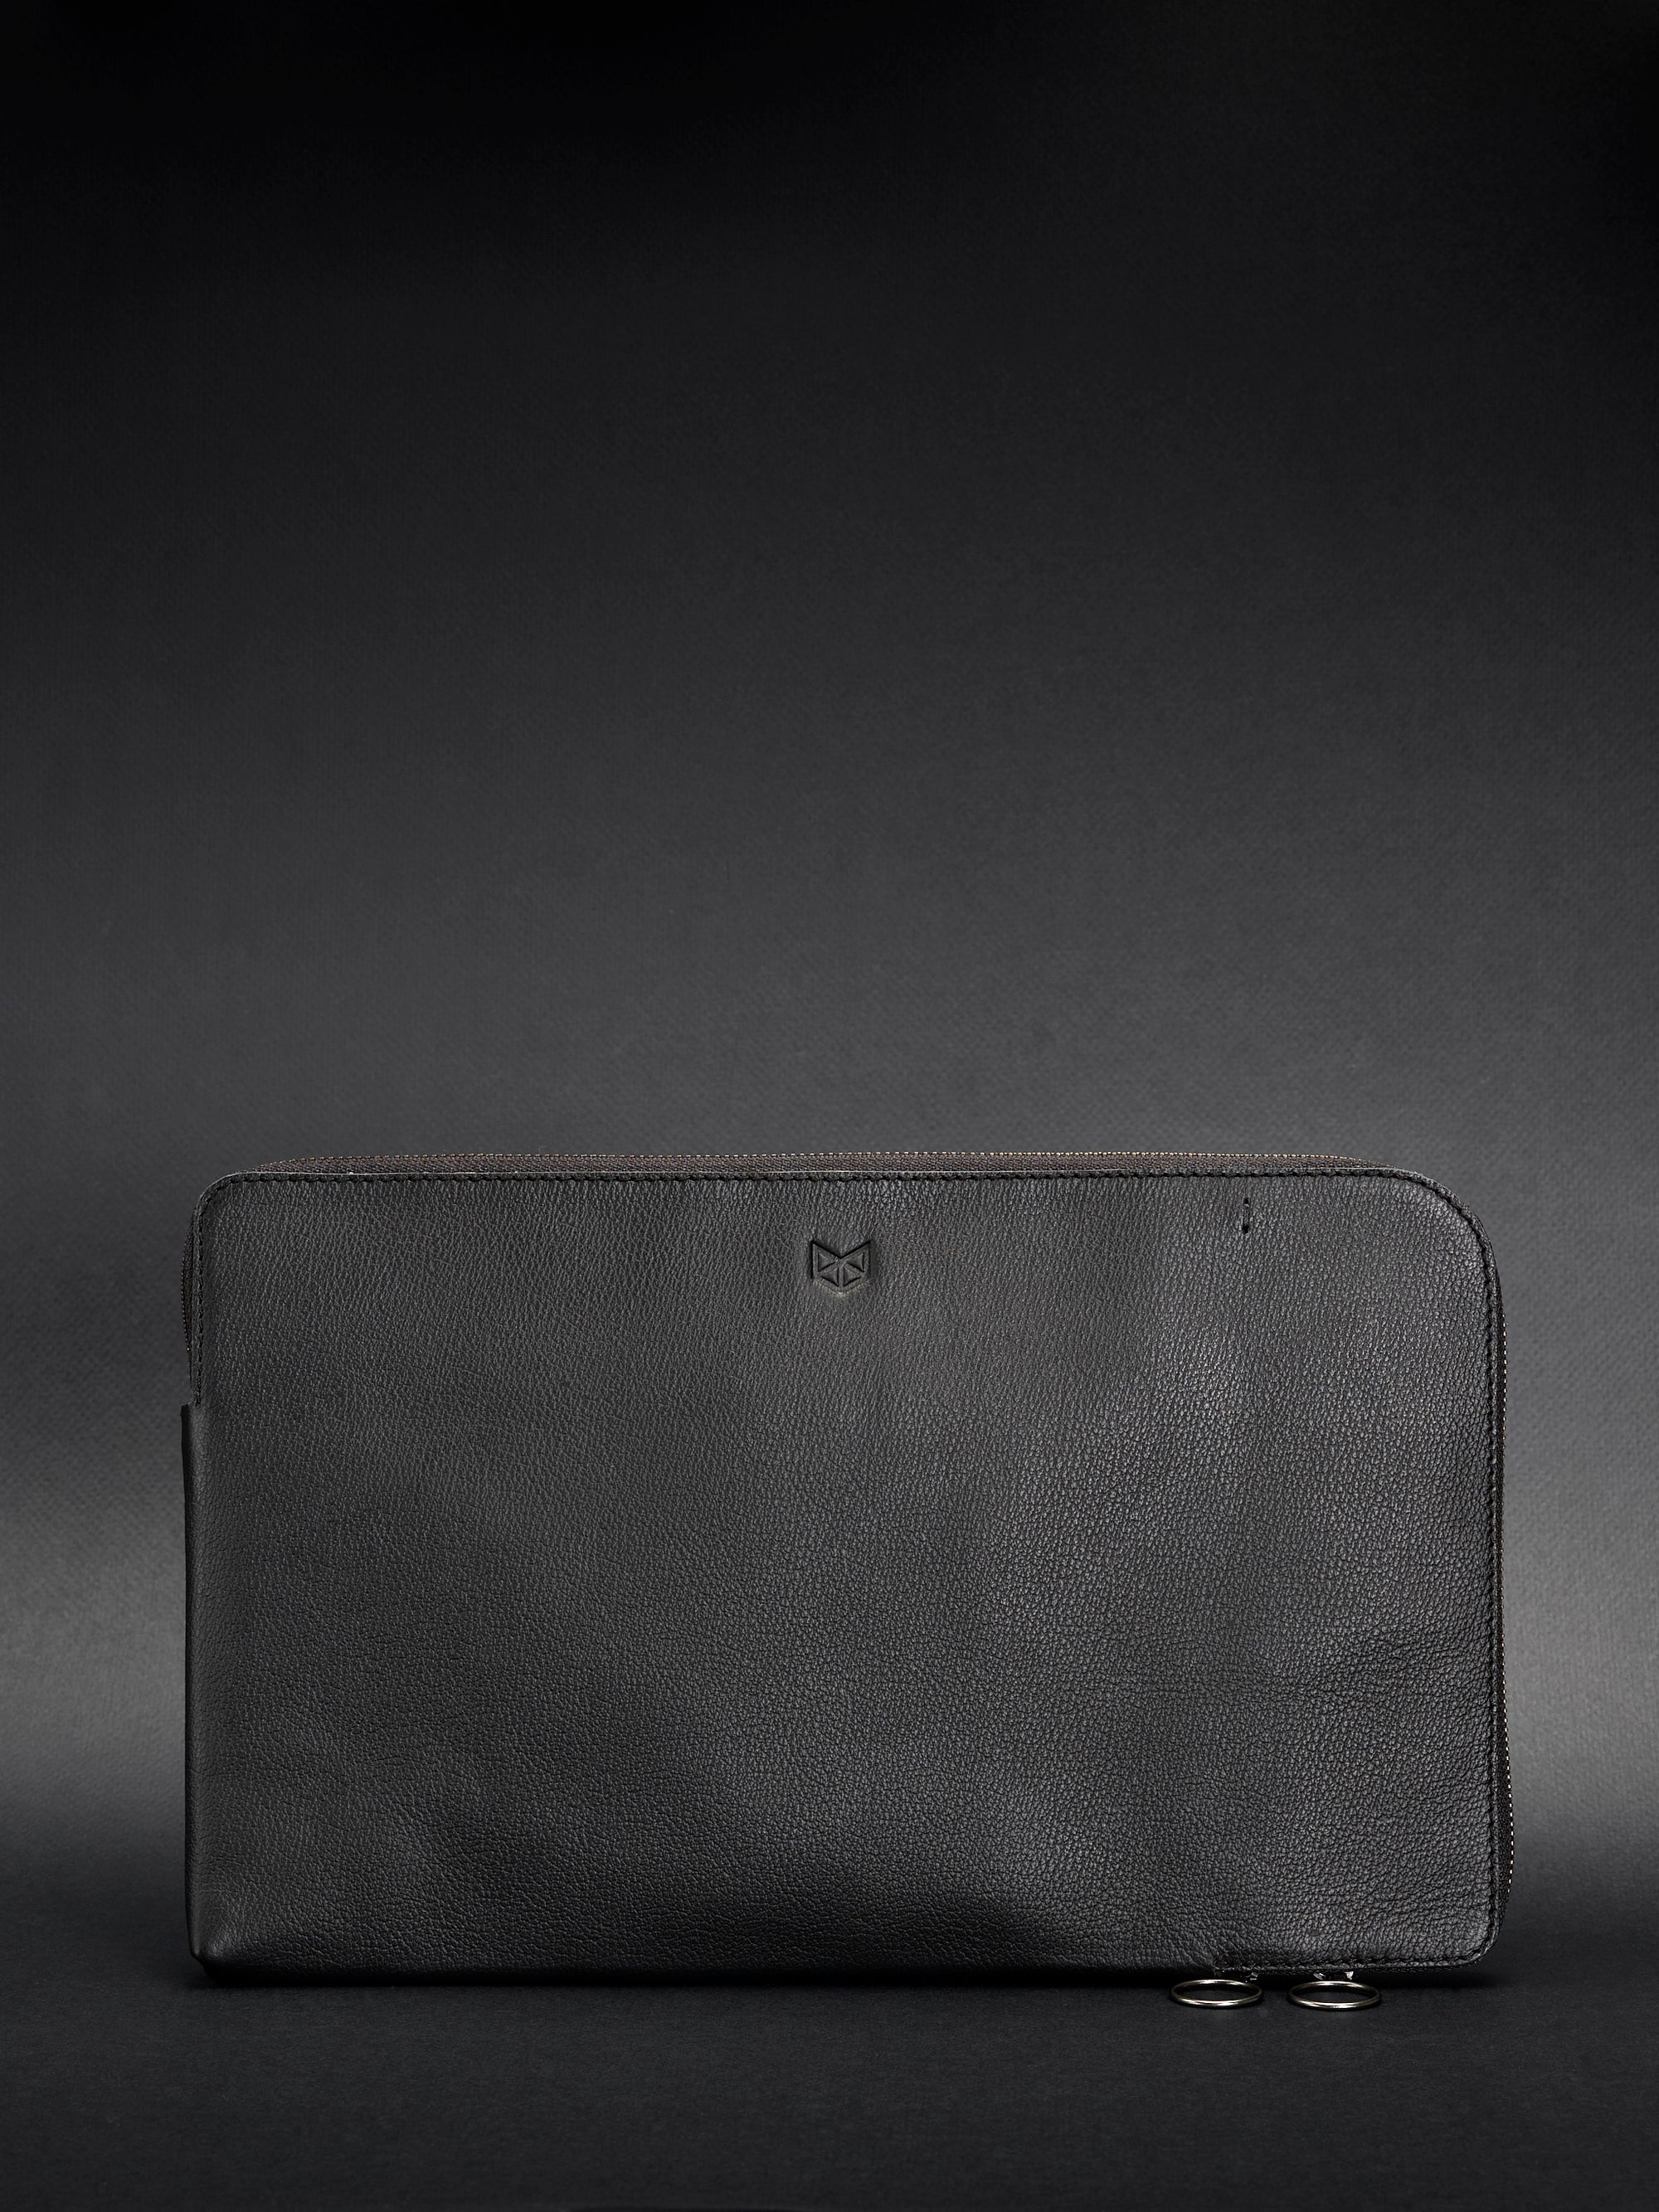 Front view. Draftsman 6 iPad Case Black, iPad Pro 11-inch, iPad Pro 12.9-inch, M1 Chip by Capra Leather